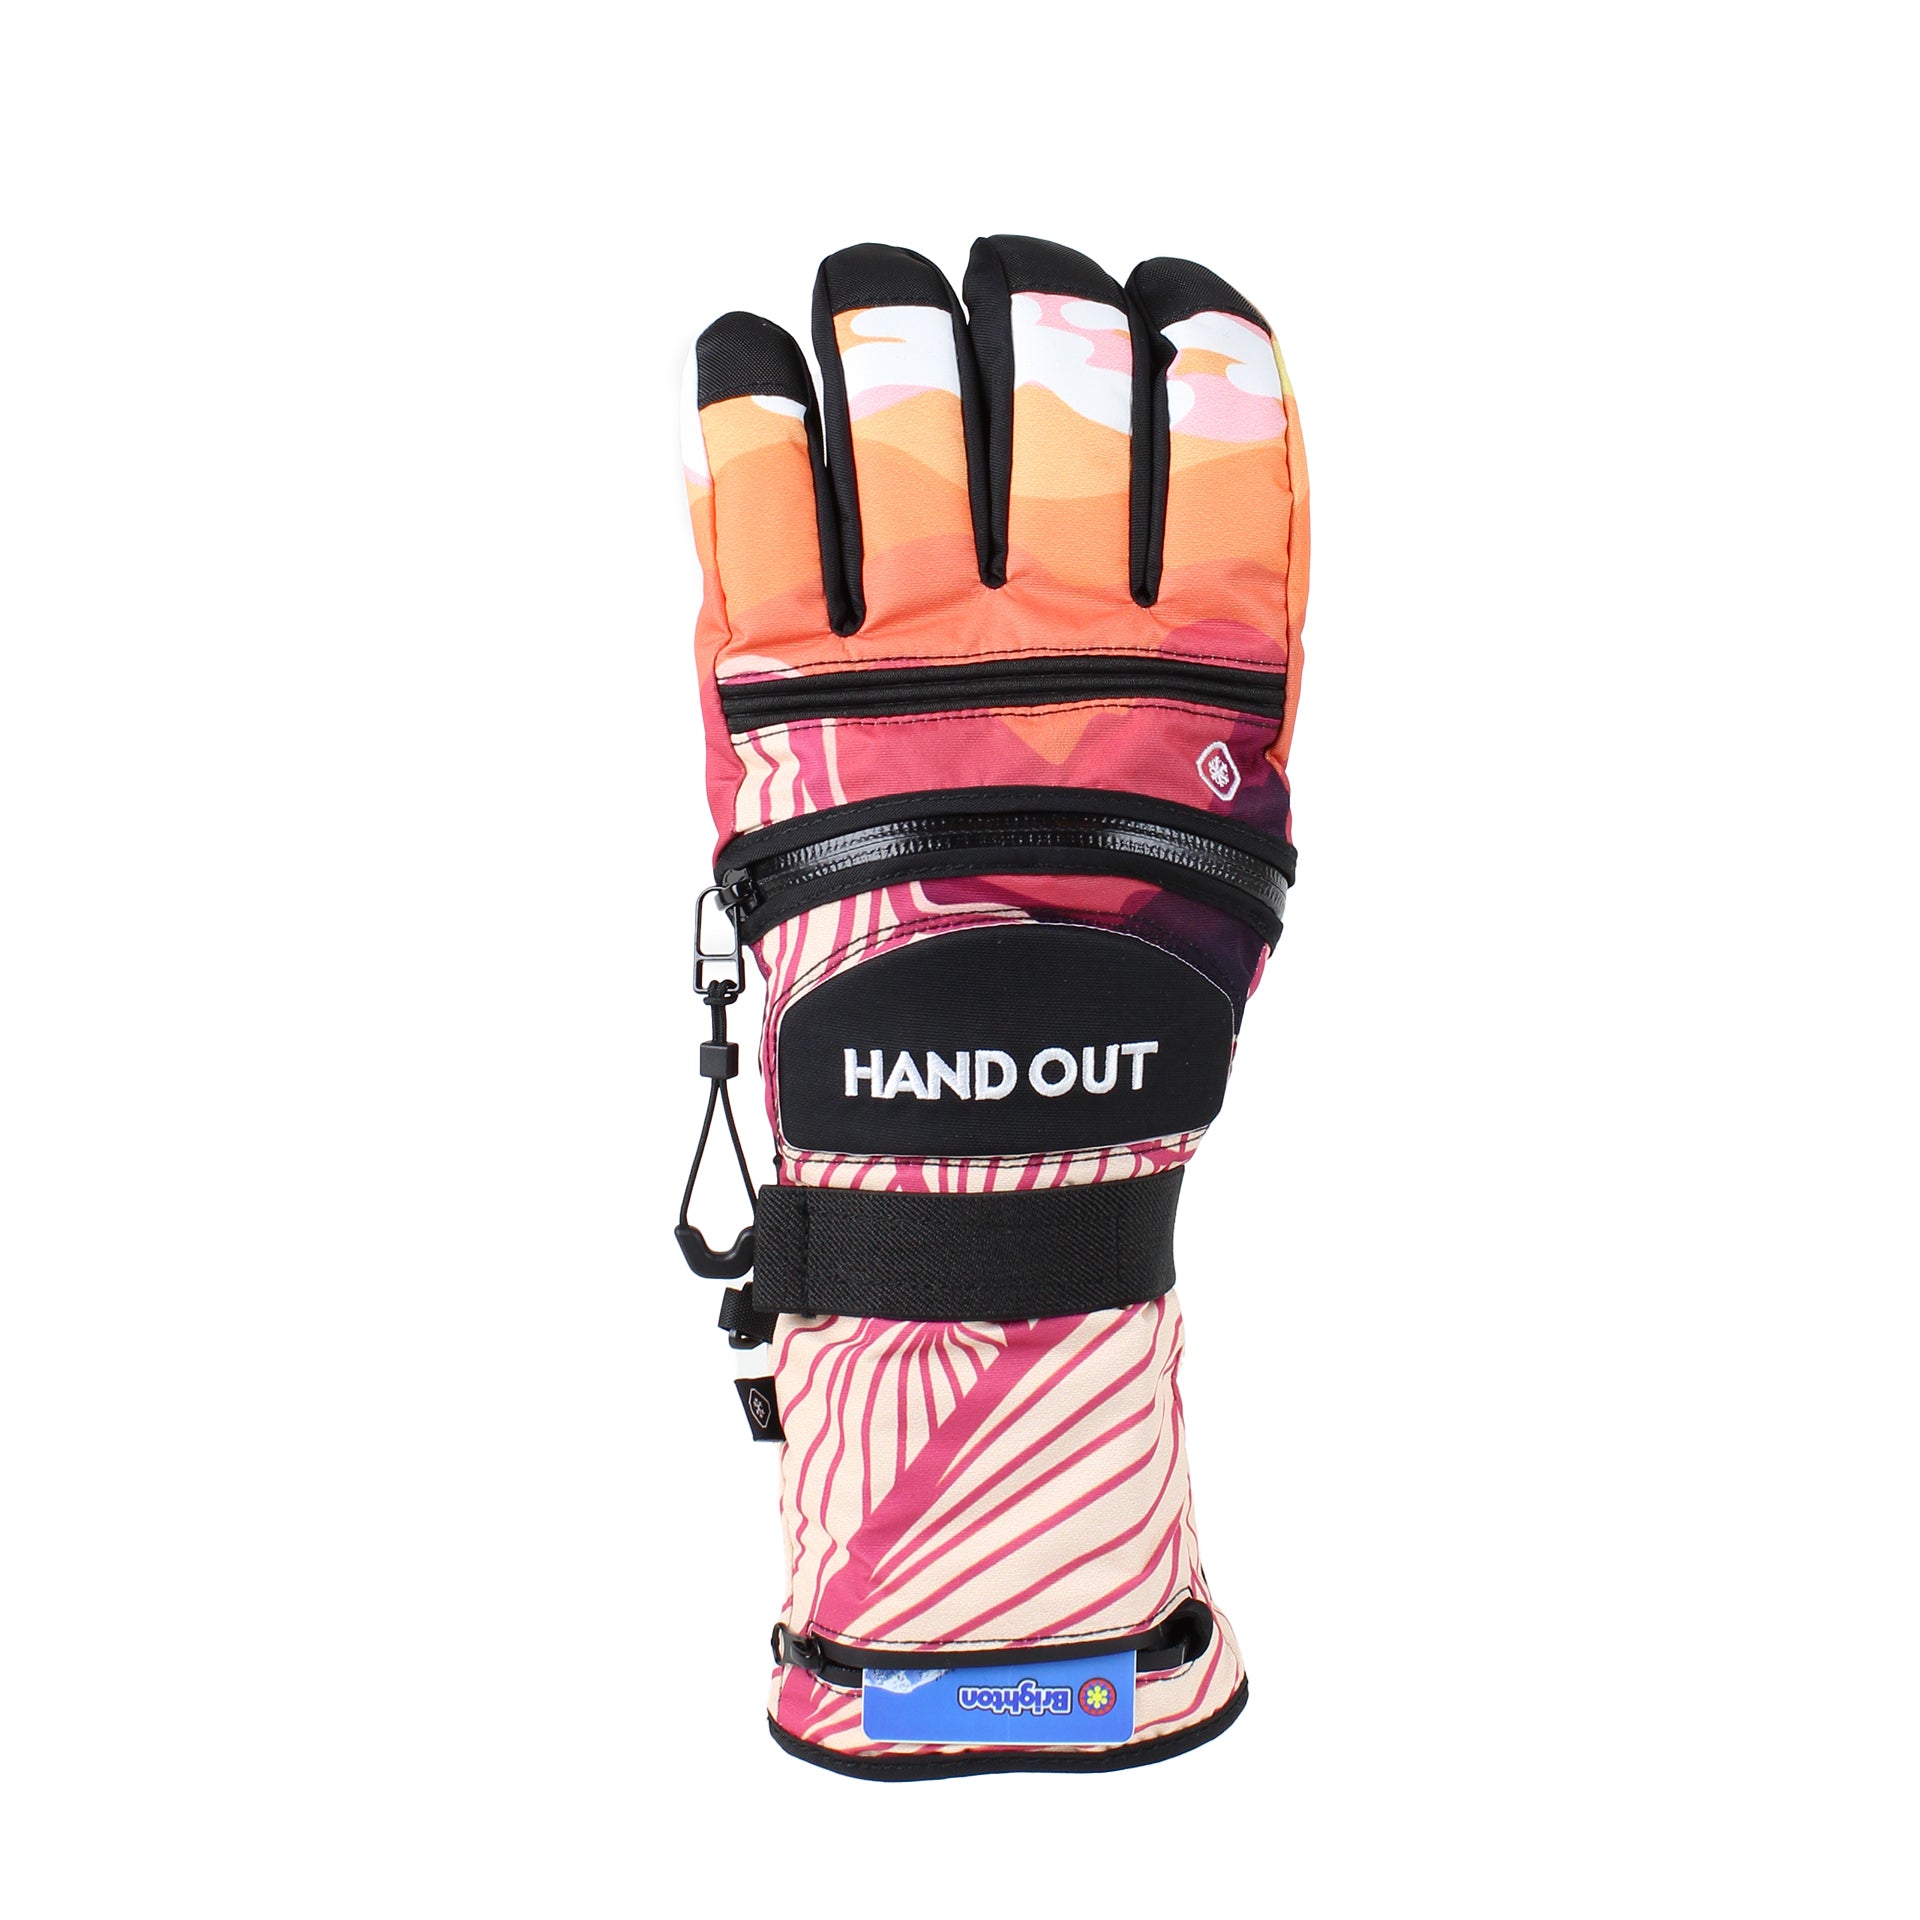 HAND OUT SPORT GLOVE